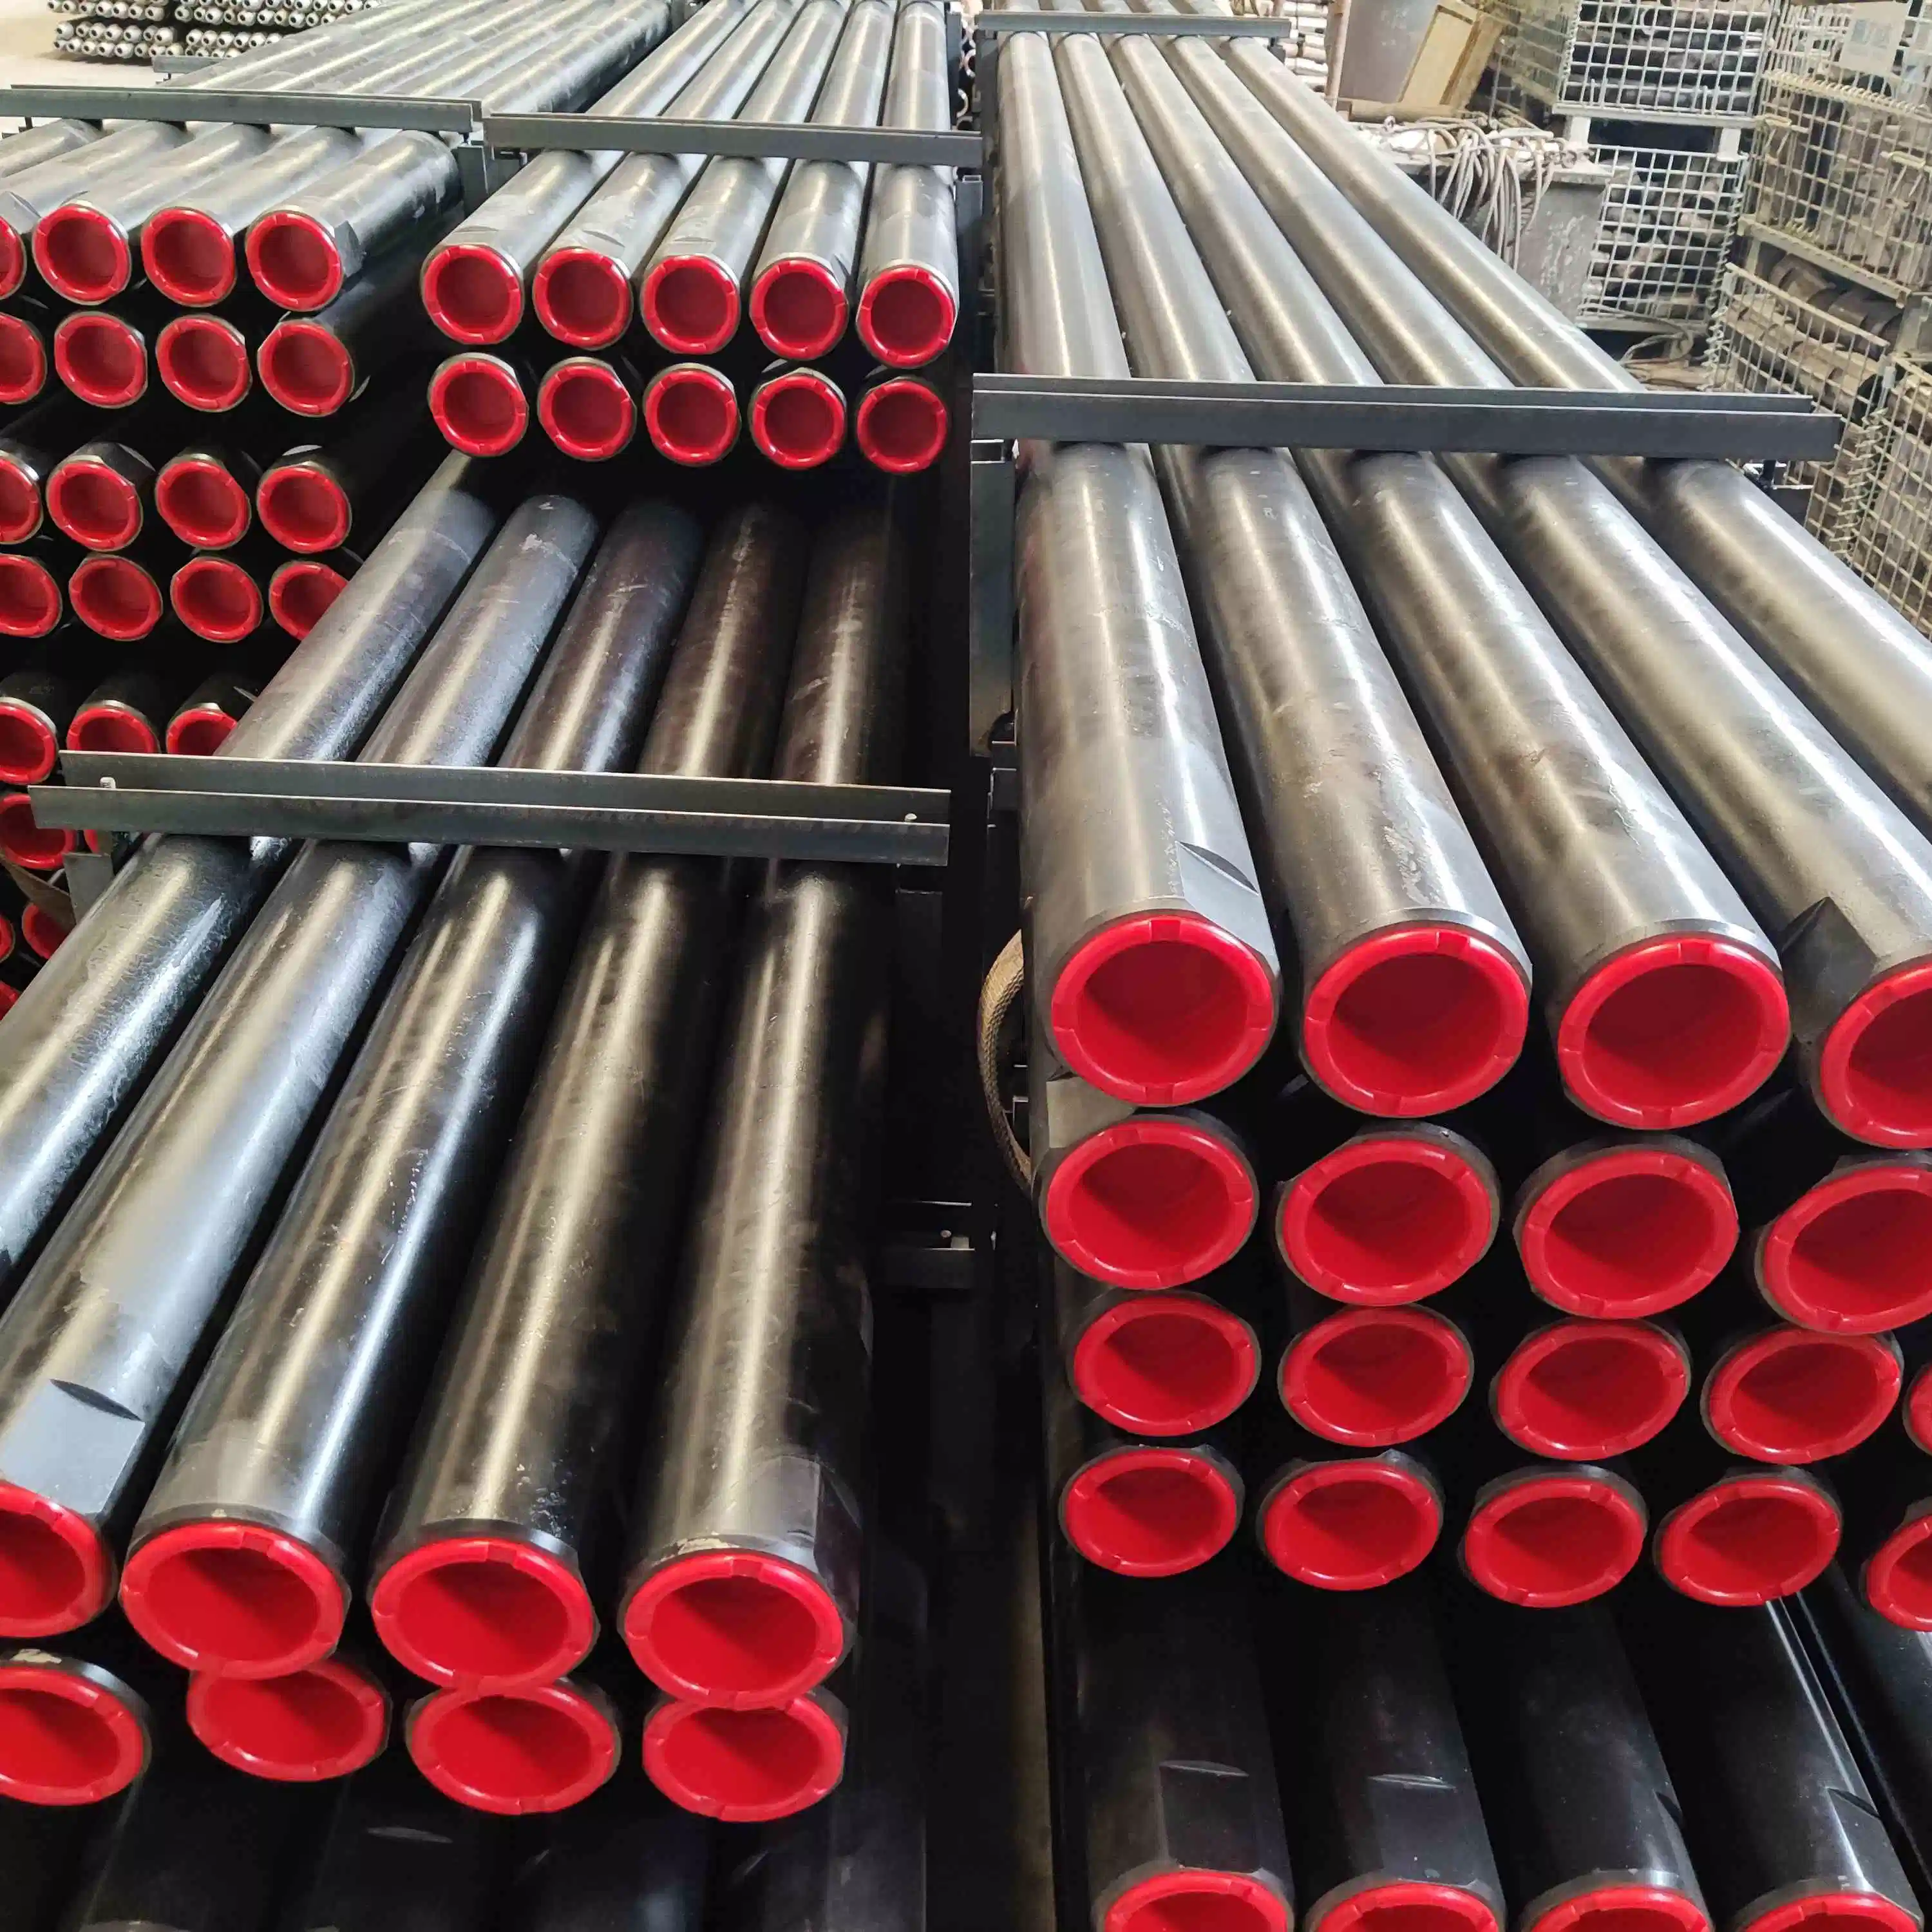 89mm or 3 1/2" DTH Drill Pipes Nc26 for Water Well or Mining Drilling Tools